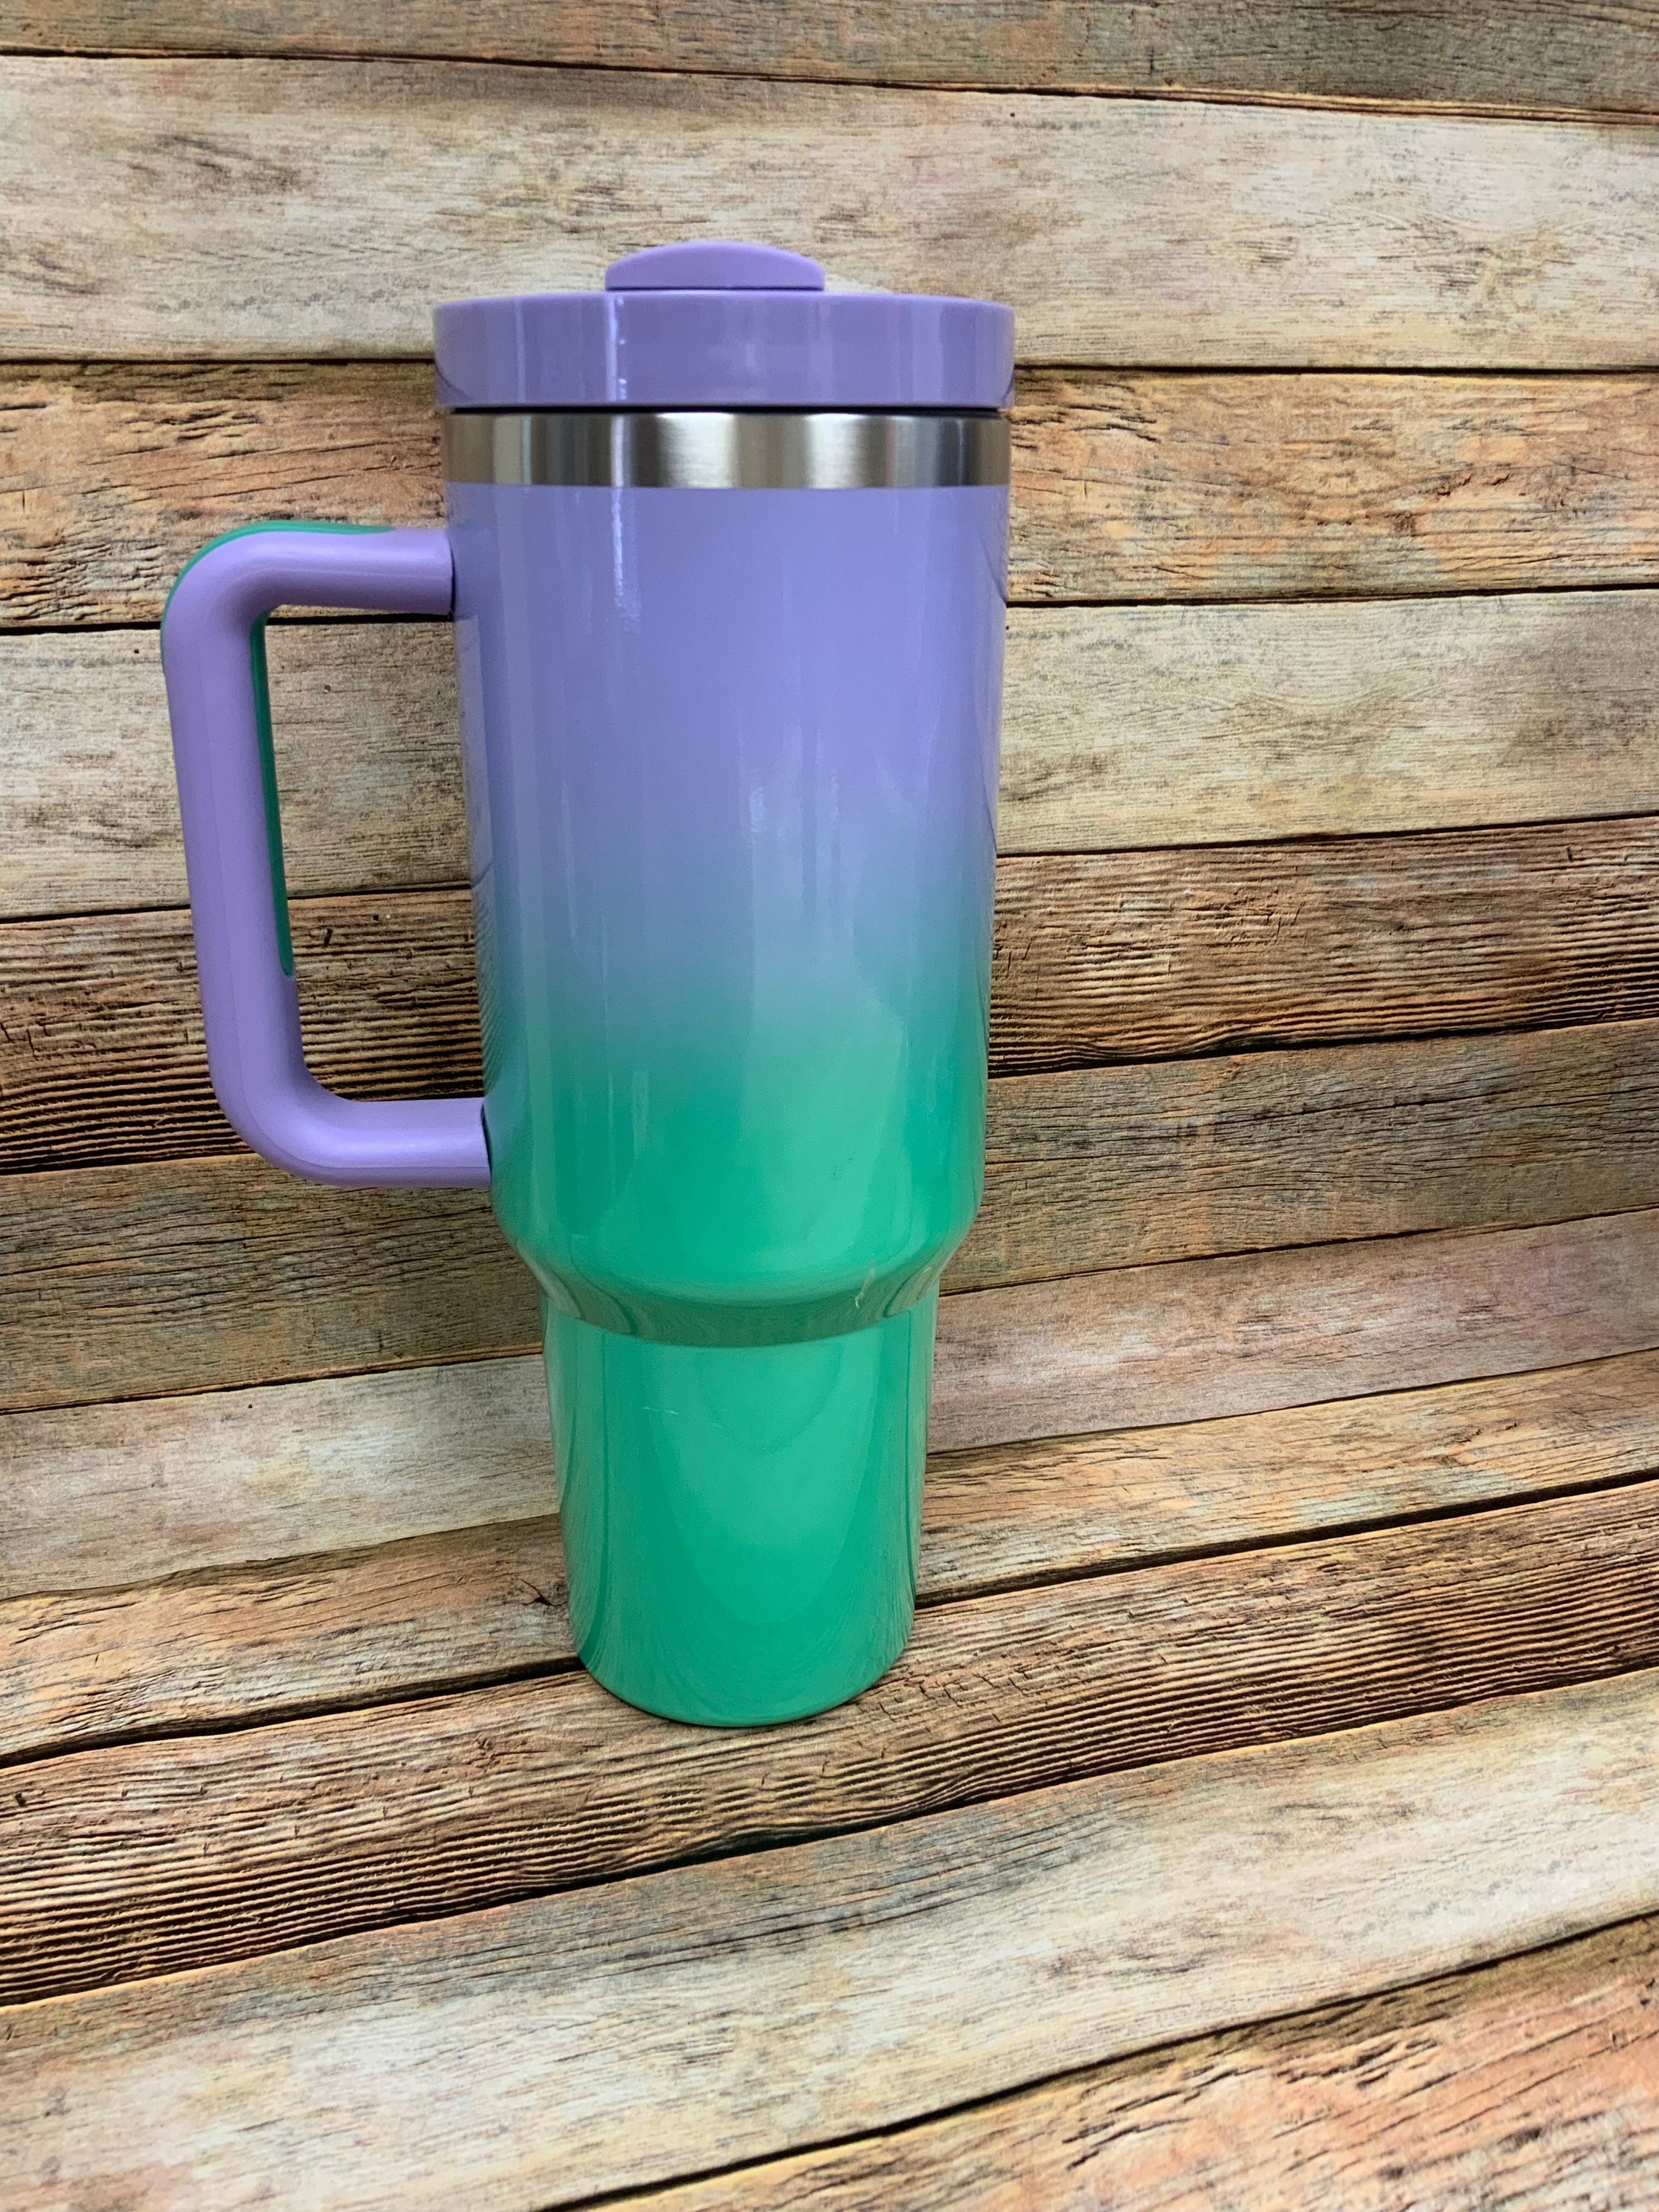 40 oz Tumbler with Handle, H2.0 Rainbow Paint Insluated Tumbler with Lid  and Straw, Double Wall Vacu…See more 40 oz Tumbler with Handle, H2.0  Rainbow